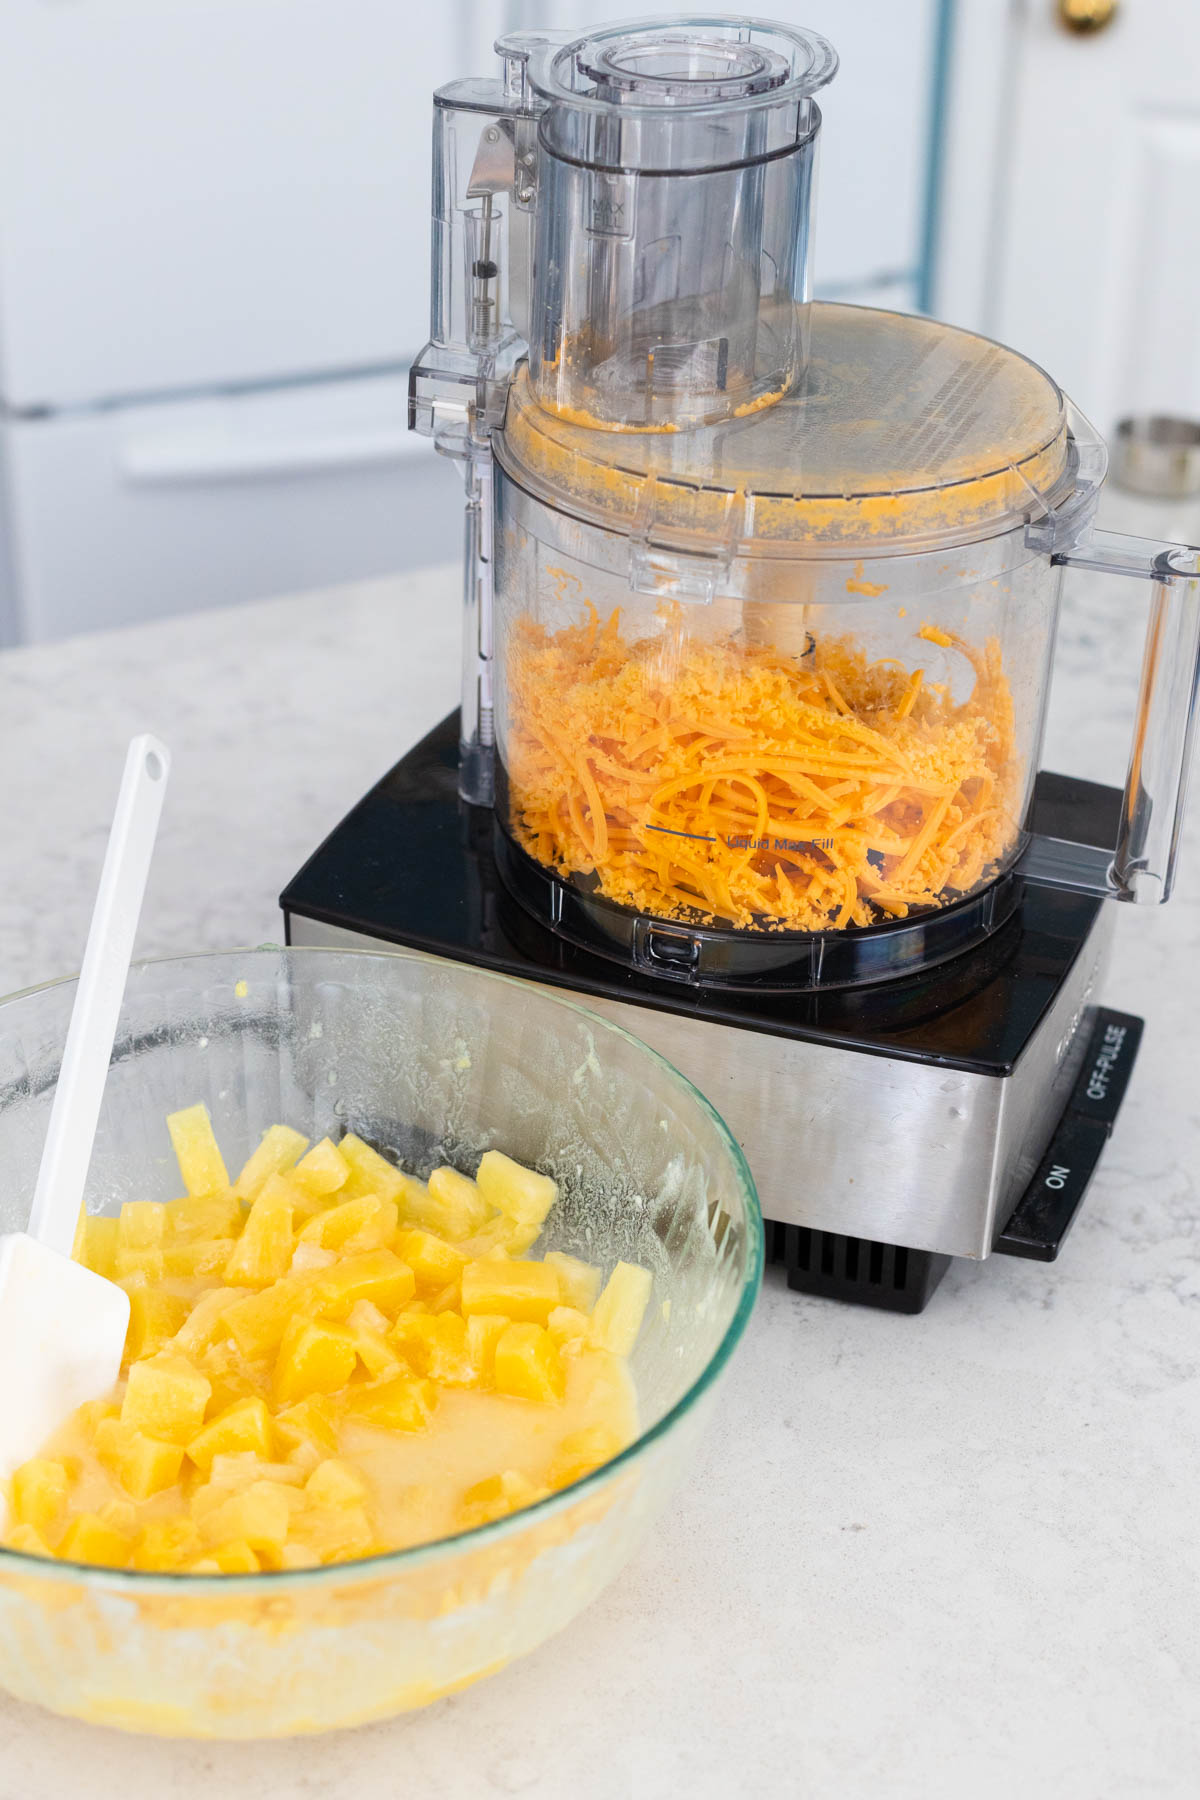 The food processor on the counter has just finished shredding cheddar cheese.